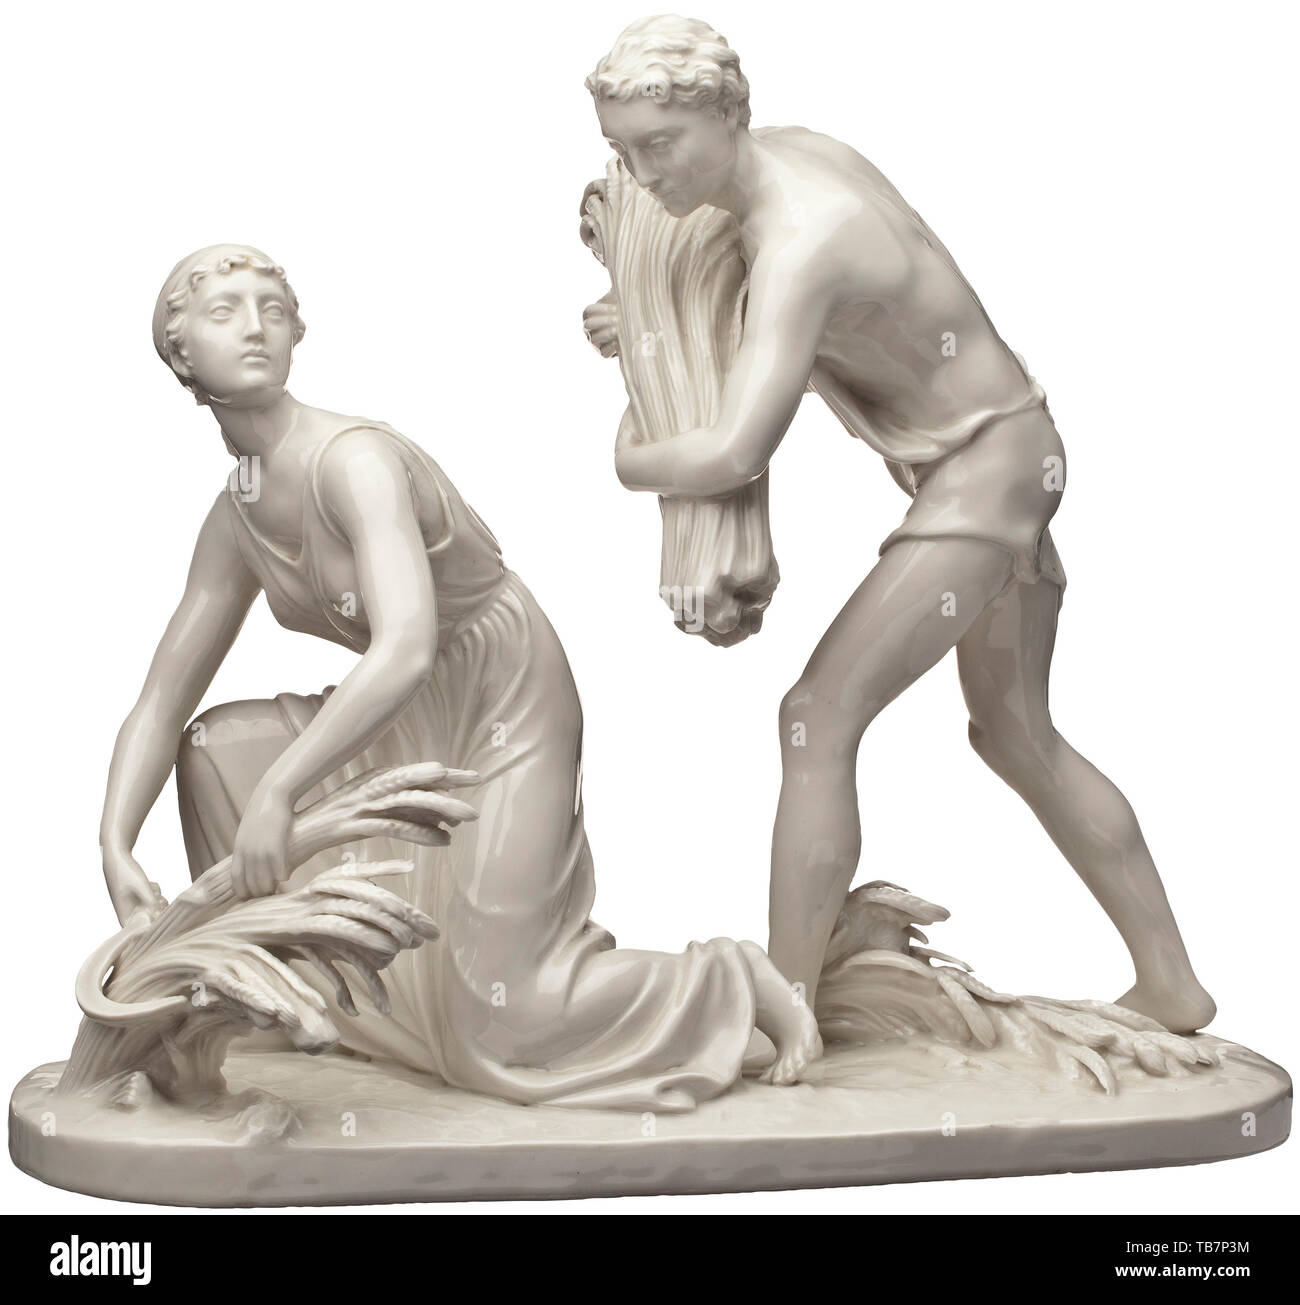 Roland von Bohr (1899 - 1962) - the centrepiece 'Summer' for the Reich Foreign Ministry, Group of figures made of white, glazed porcelain by the Nymphenburg manufactory. Ancient style depiction of a youth and a girl at the grain harvest. The model number '851 -1' and a diamond-shaped shield stamped on the base, also a green underglaze manufactory mark. One foot with a crack, lightly knocked, especially the tip of the grain bundle, otherwise an excellently preserved figural group. Extremely rare. Height circa 32 cm, length 38 cm. The four centrepieces 'Spring', 'Summer', 'Au, Editorial-Use-Only Stock Photo